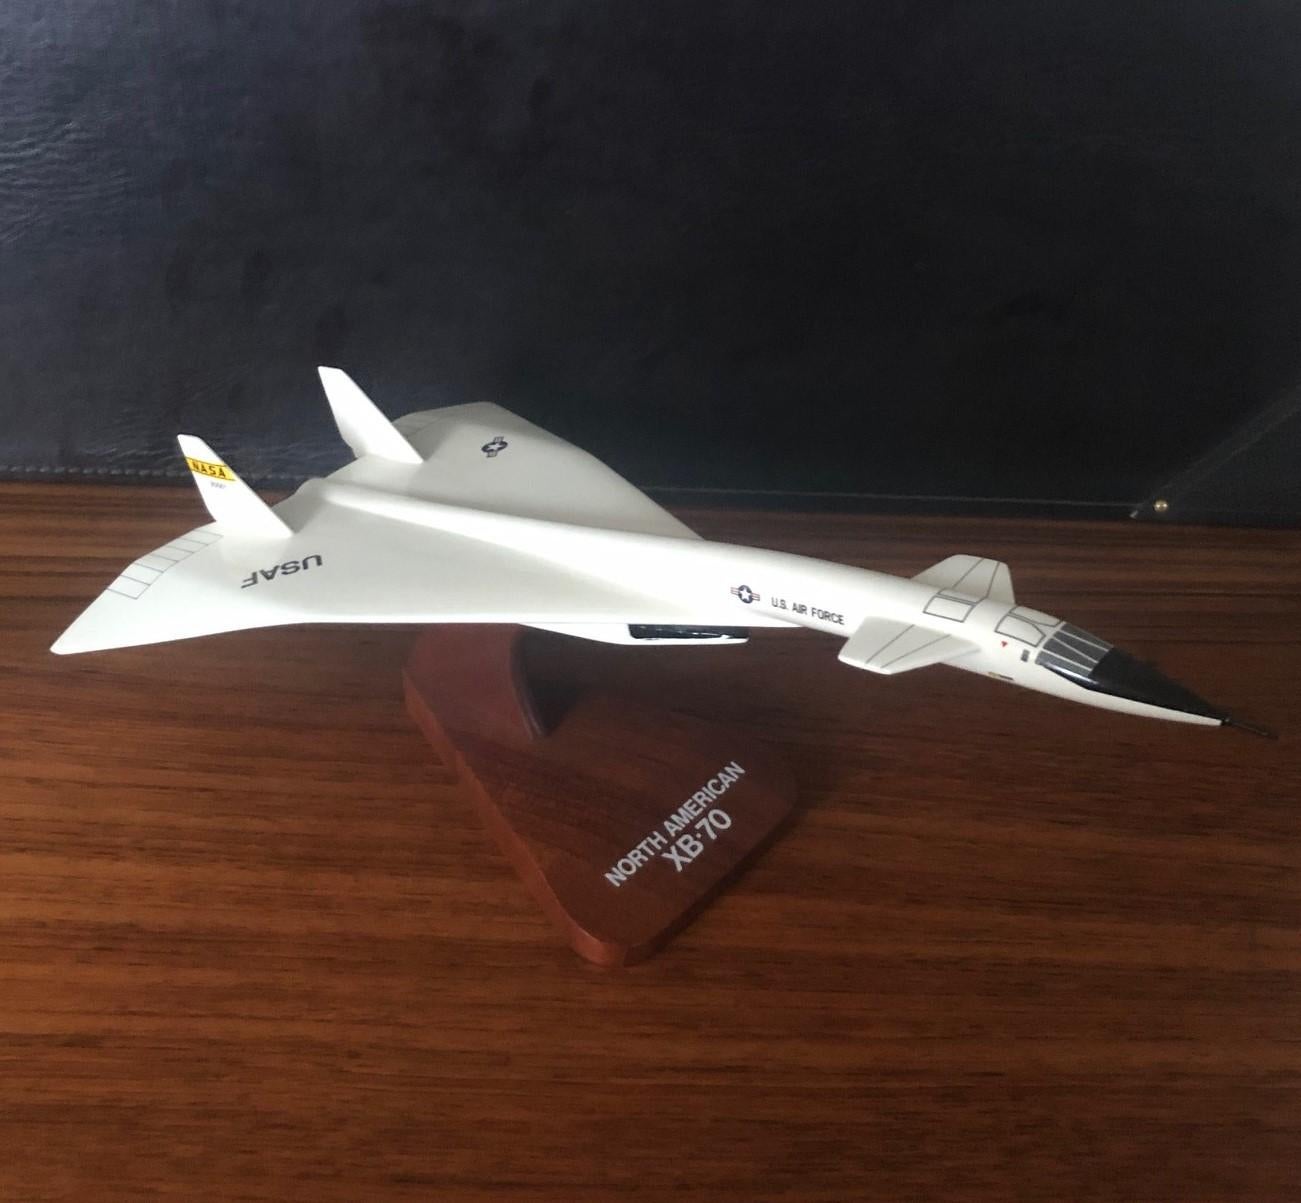 A very cool U.S. Air Force NASA XB-70 Valkyrie airplane / bomber desk model, circa 1970s. The piece is in very good condition and super high quality. 
 is made of wood and mounted on a triangular wooden base; The plane has a white lacquer finish